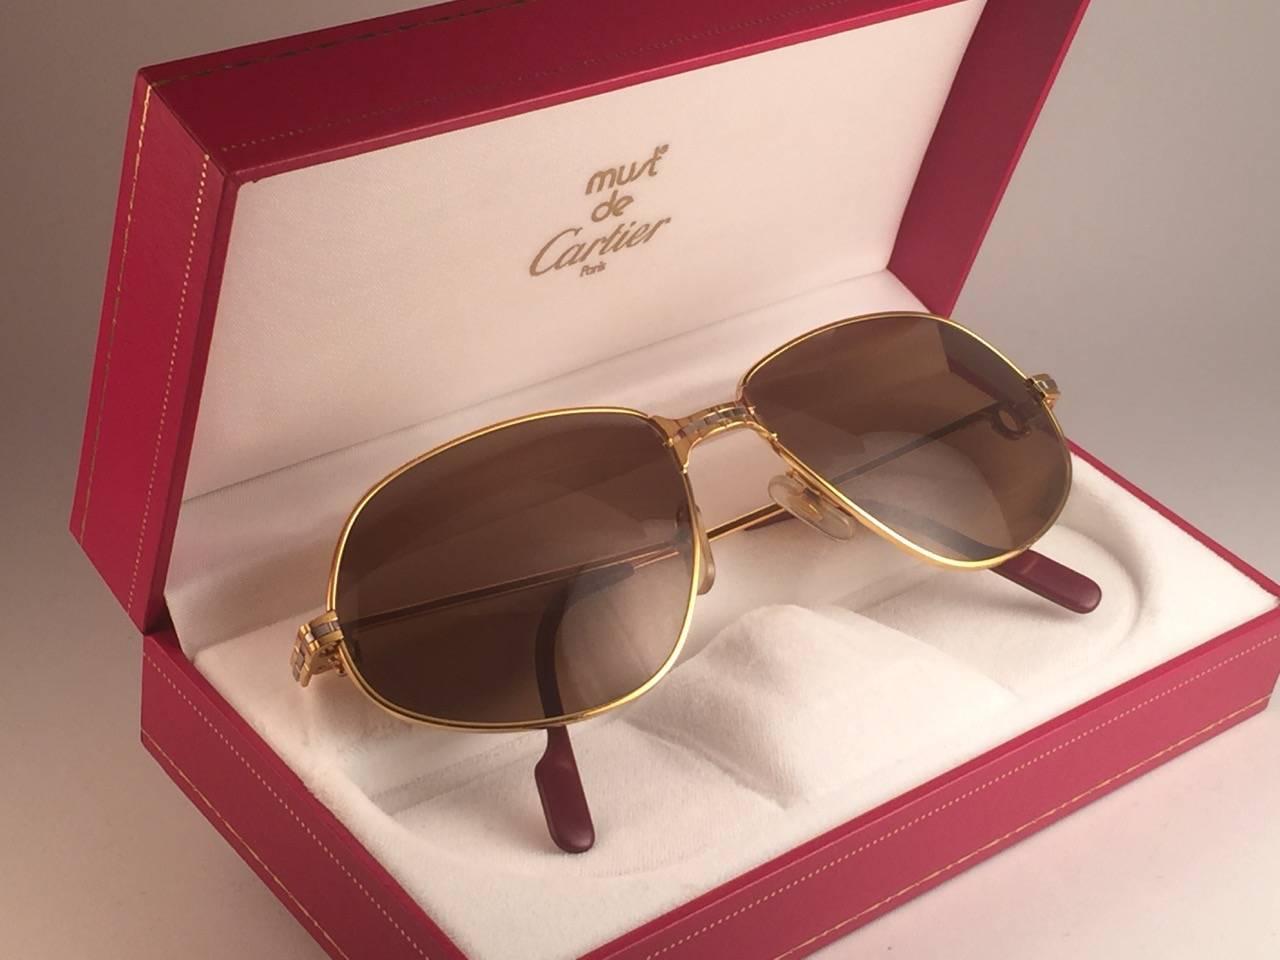 New 1988 Cartier Panthere unglasses with brown (uv protection) lenses. 
Frame is with the front and sides in yellow and white gold. All hallmarks. burgundy ear paddles. Both arms sport the C from Cartier on the temple. G
These are like a pair of